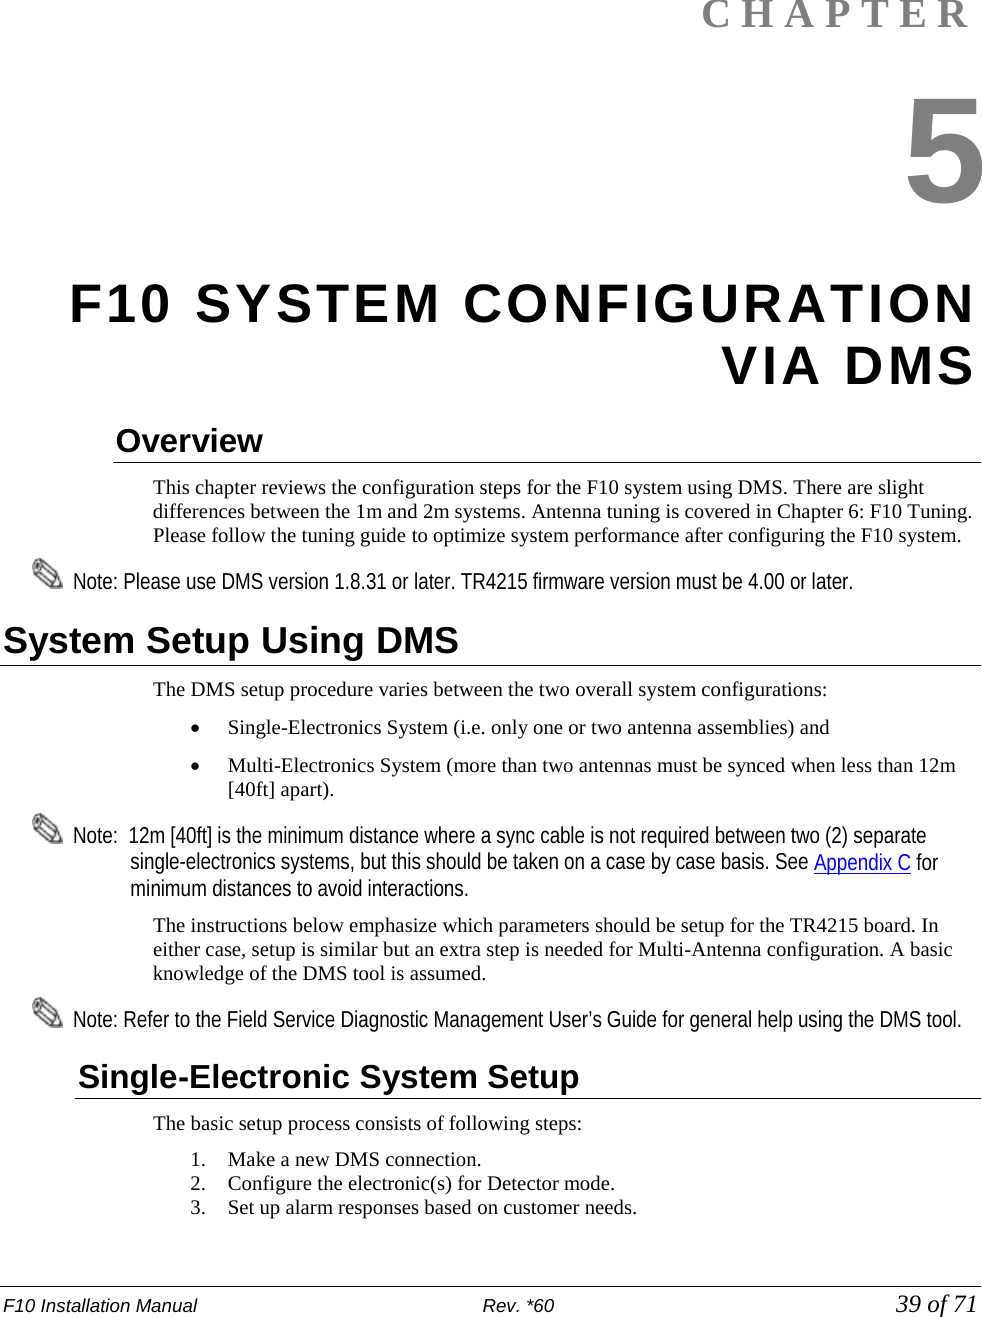 F10 Installation Manual                          Rev. *60            39 of 71   CHAPTER 5 F10 SYSTEM CONFIGURATION VIA DMS Overview This chapter reviews the configuration steps for the F10 system using DMS. There are slight differences between the 1m and 2m systems. Antenna tuning is covered in Chapter 6: F10 Tuning. Please follow the tuning guide to optimize system performance after configuring the F10 system.   Note: Please use DMS version 1.8.31 or later. TR4215 firmware version must be 4.00 or later. System Setup Using DMS The DMS setup procedure varies between the two overall system configurations:  • Single-Electronics System (i.e. only one or two antenna assemblies) and   • Multi-Electronics System (more than two antennas must be synced when less than 12m [40ft] apart).     Note:  12m [40ft] is the minimum distance where a sync cable is not required between two (2) separate single-electronics systems, but this should be taken on a case by case basis. See Appendix C for minimum distances to avoid interactions. The instructions below emphasize which parameters should be setup for the TR4215 board. In either case, setup is similar but an extra step is needed for Multi-Antenna configuration. A basic knowledge of the DMS tool is assumed.   Note: Refer to the Field Service Diagnostic Management User’s Guide for general help using the DMS tool. Single-Electronic System Setup The basic setup process consists of following steps: 1. Make a new DMS connection. 2. Configure the electronic(s) for Detector mode.  3. Set up alarm responses based on customer needs.  